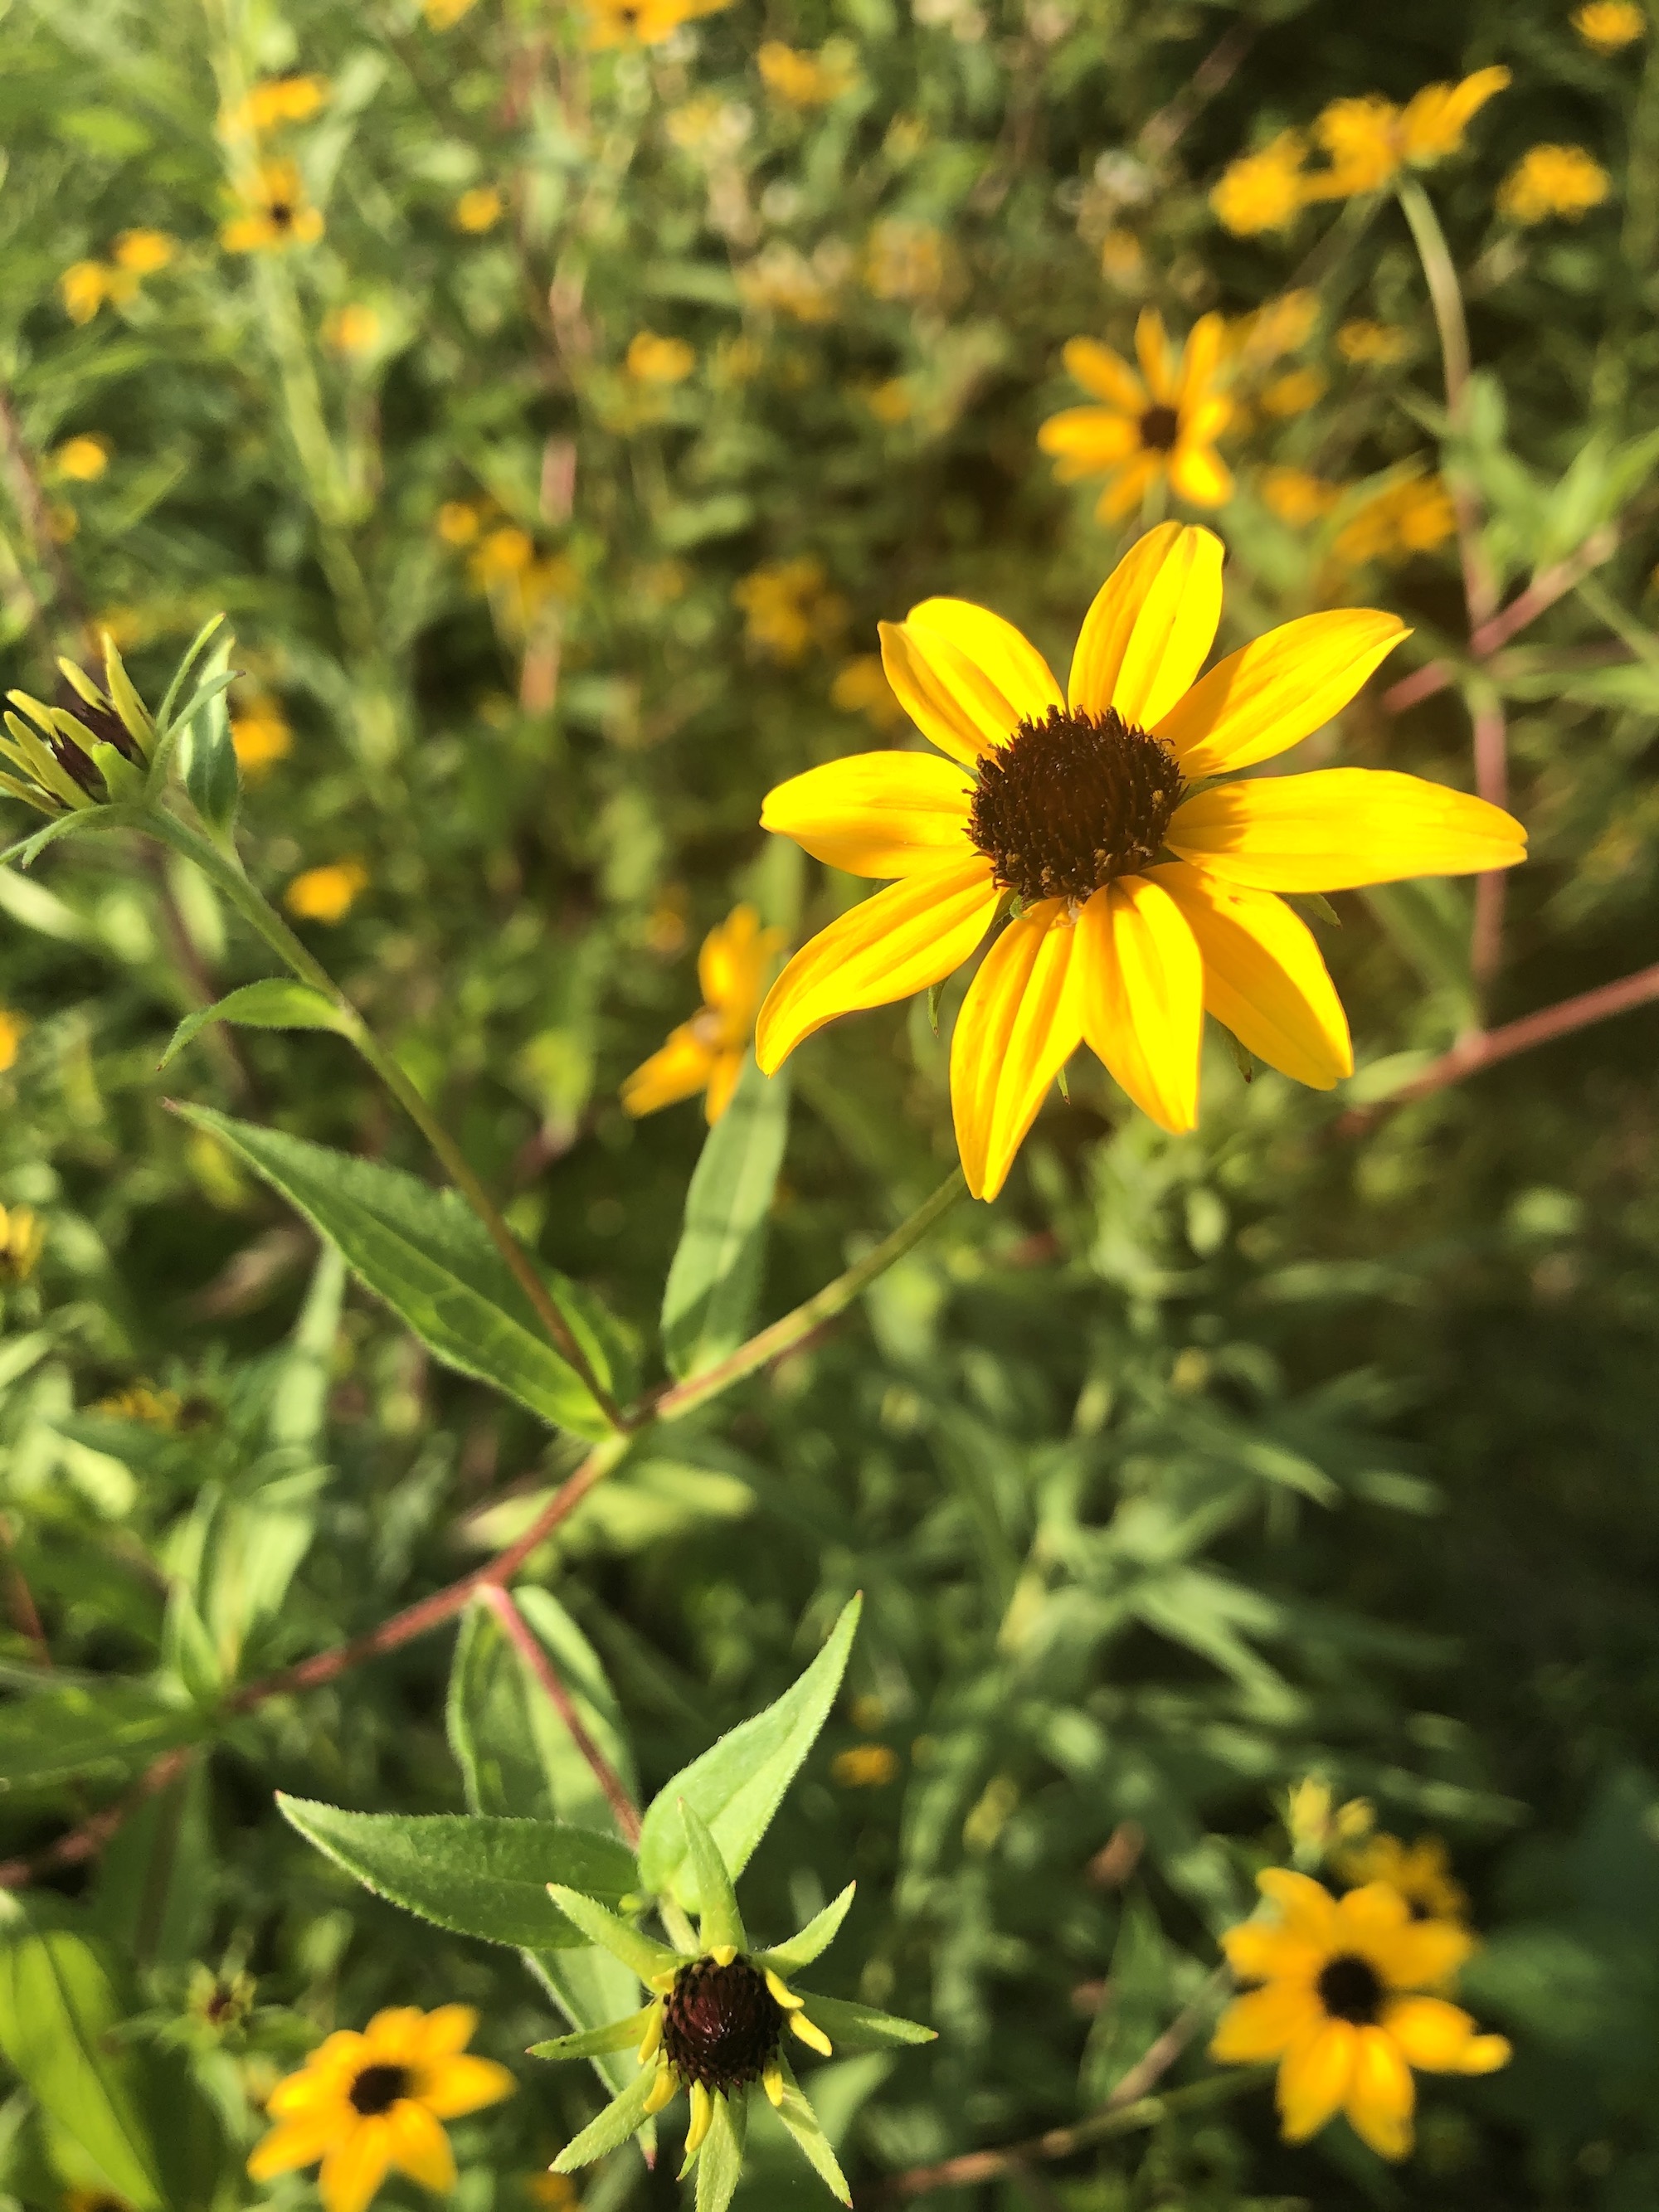 Brown-eyed Susan on bank of retaining pond in Madison, Wisconsin on July 26, 2020.